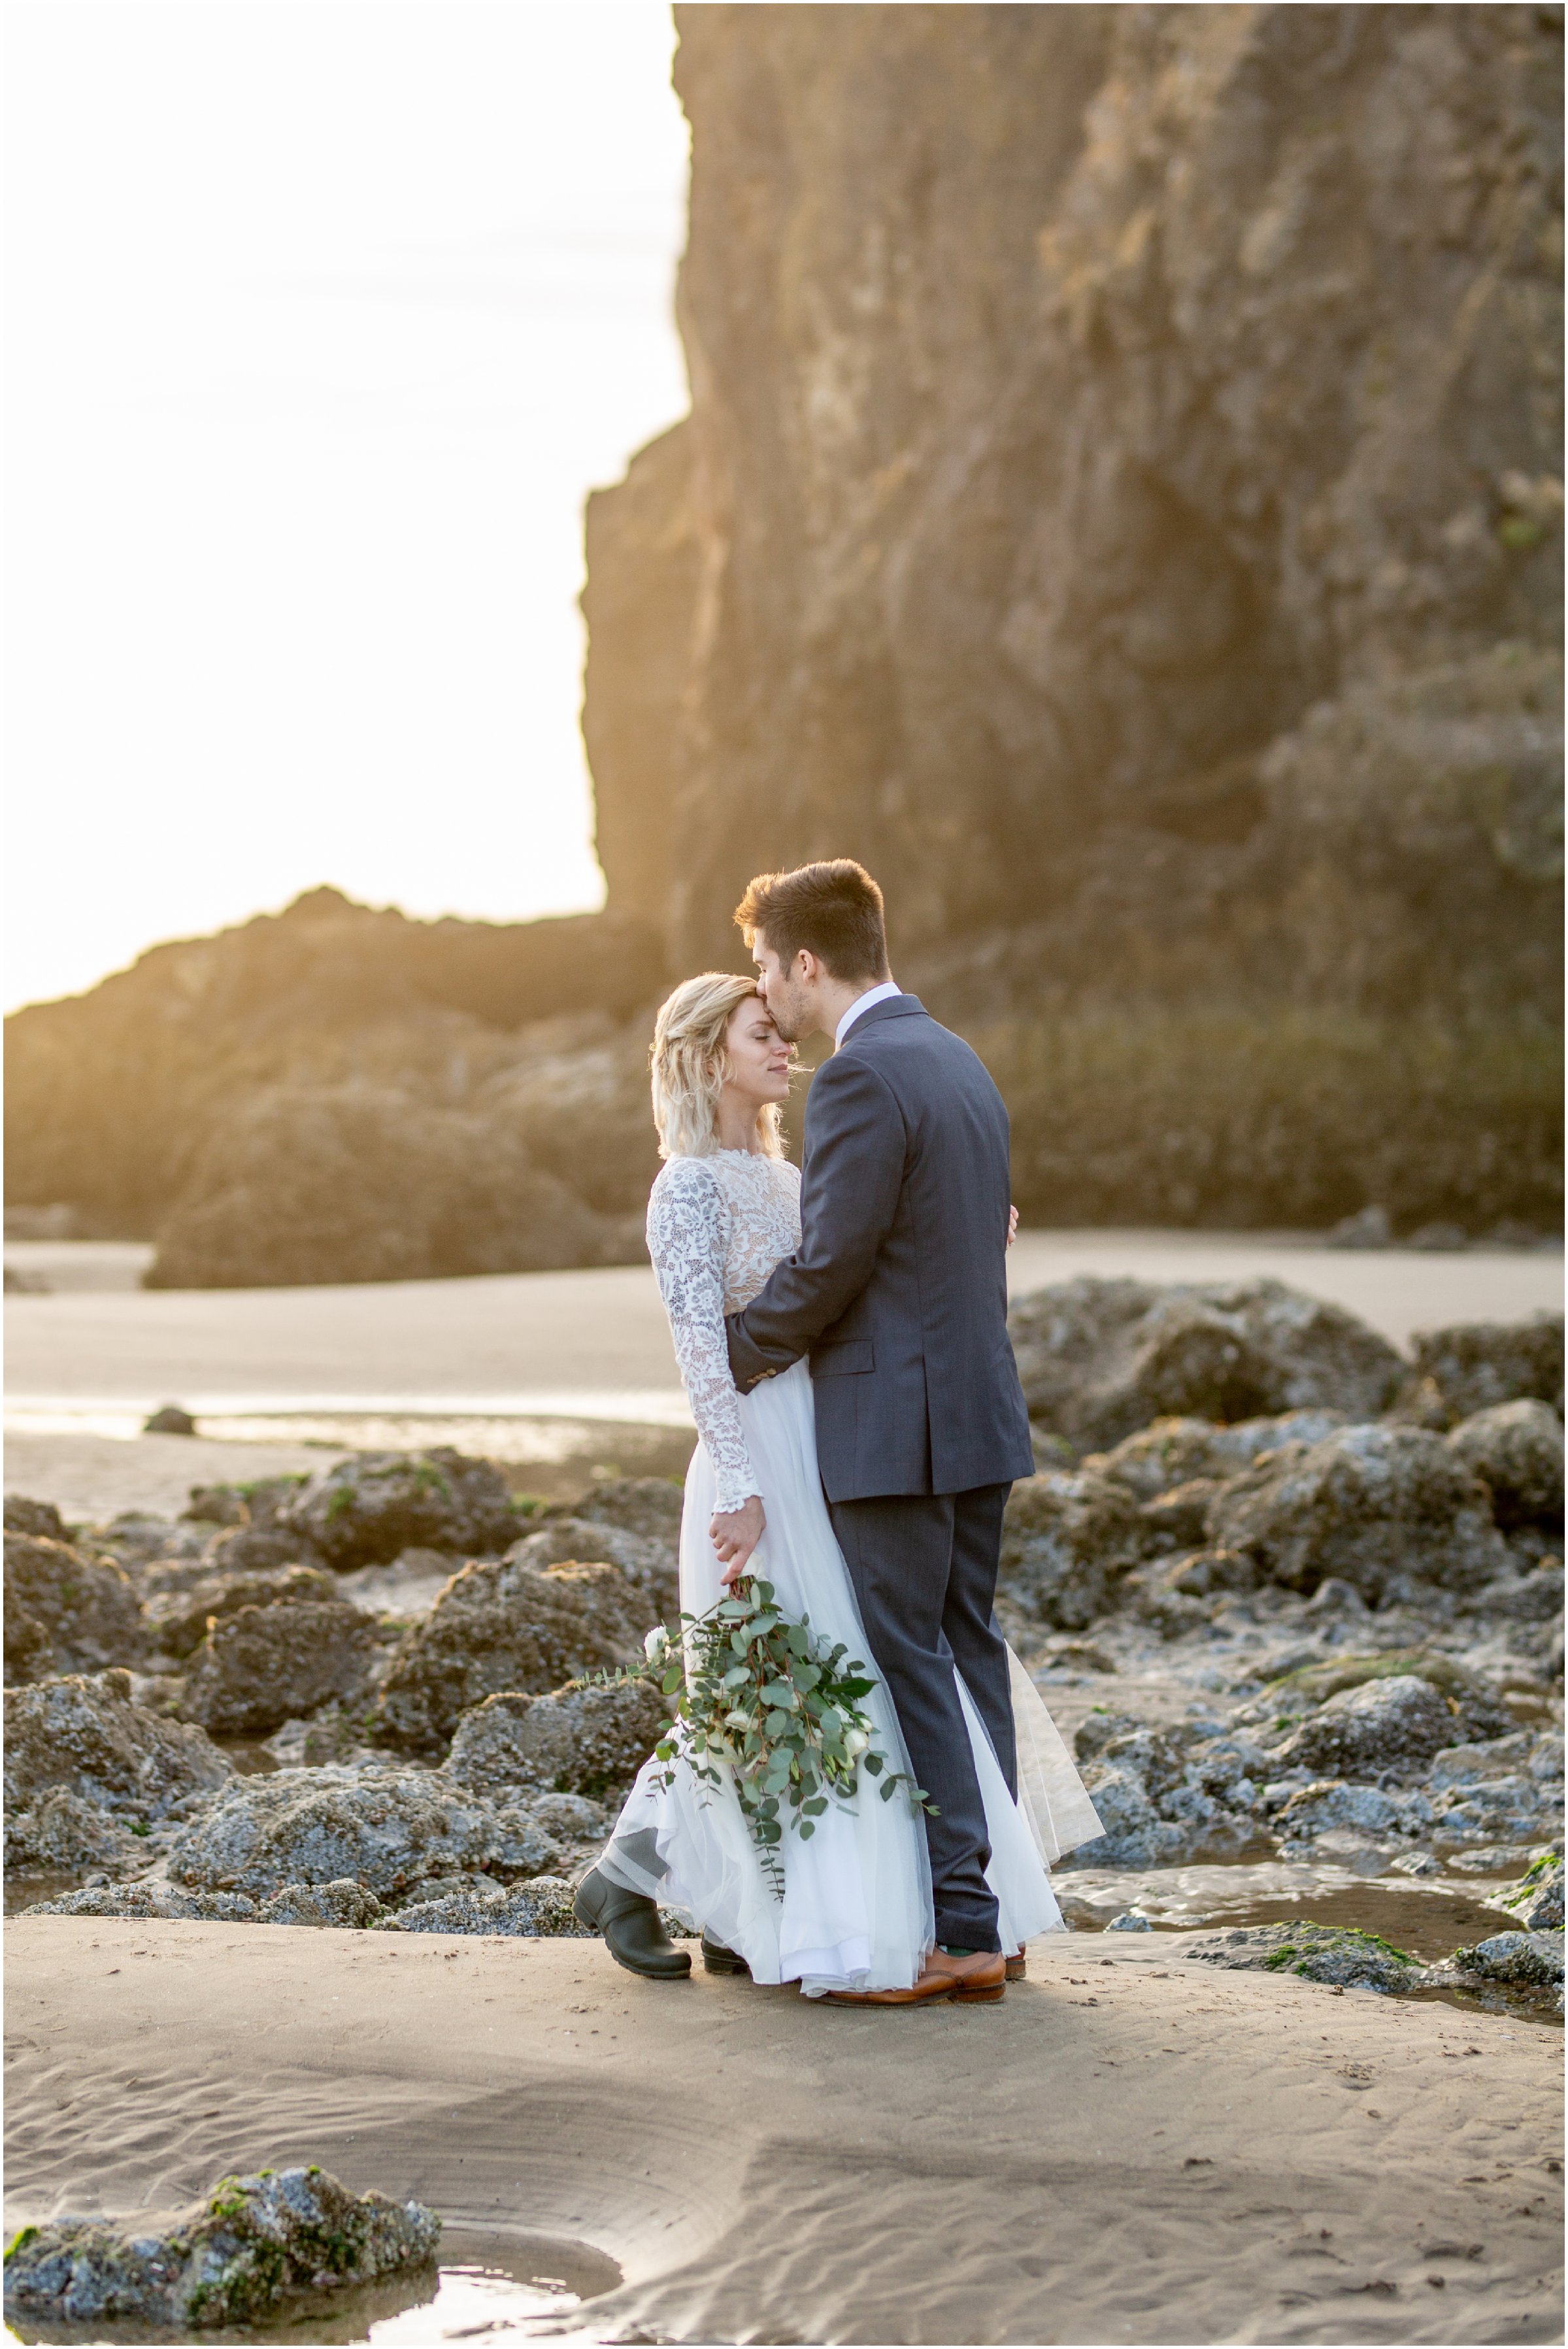 groom kisses bride on the forehead on the beach as sun shines through the rocks during sunet by cannon beach elopement photographer